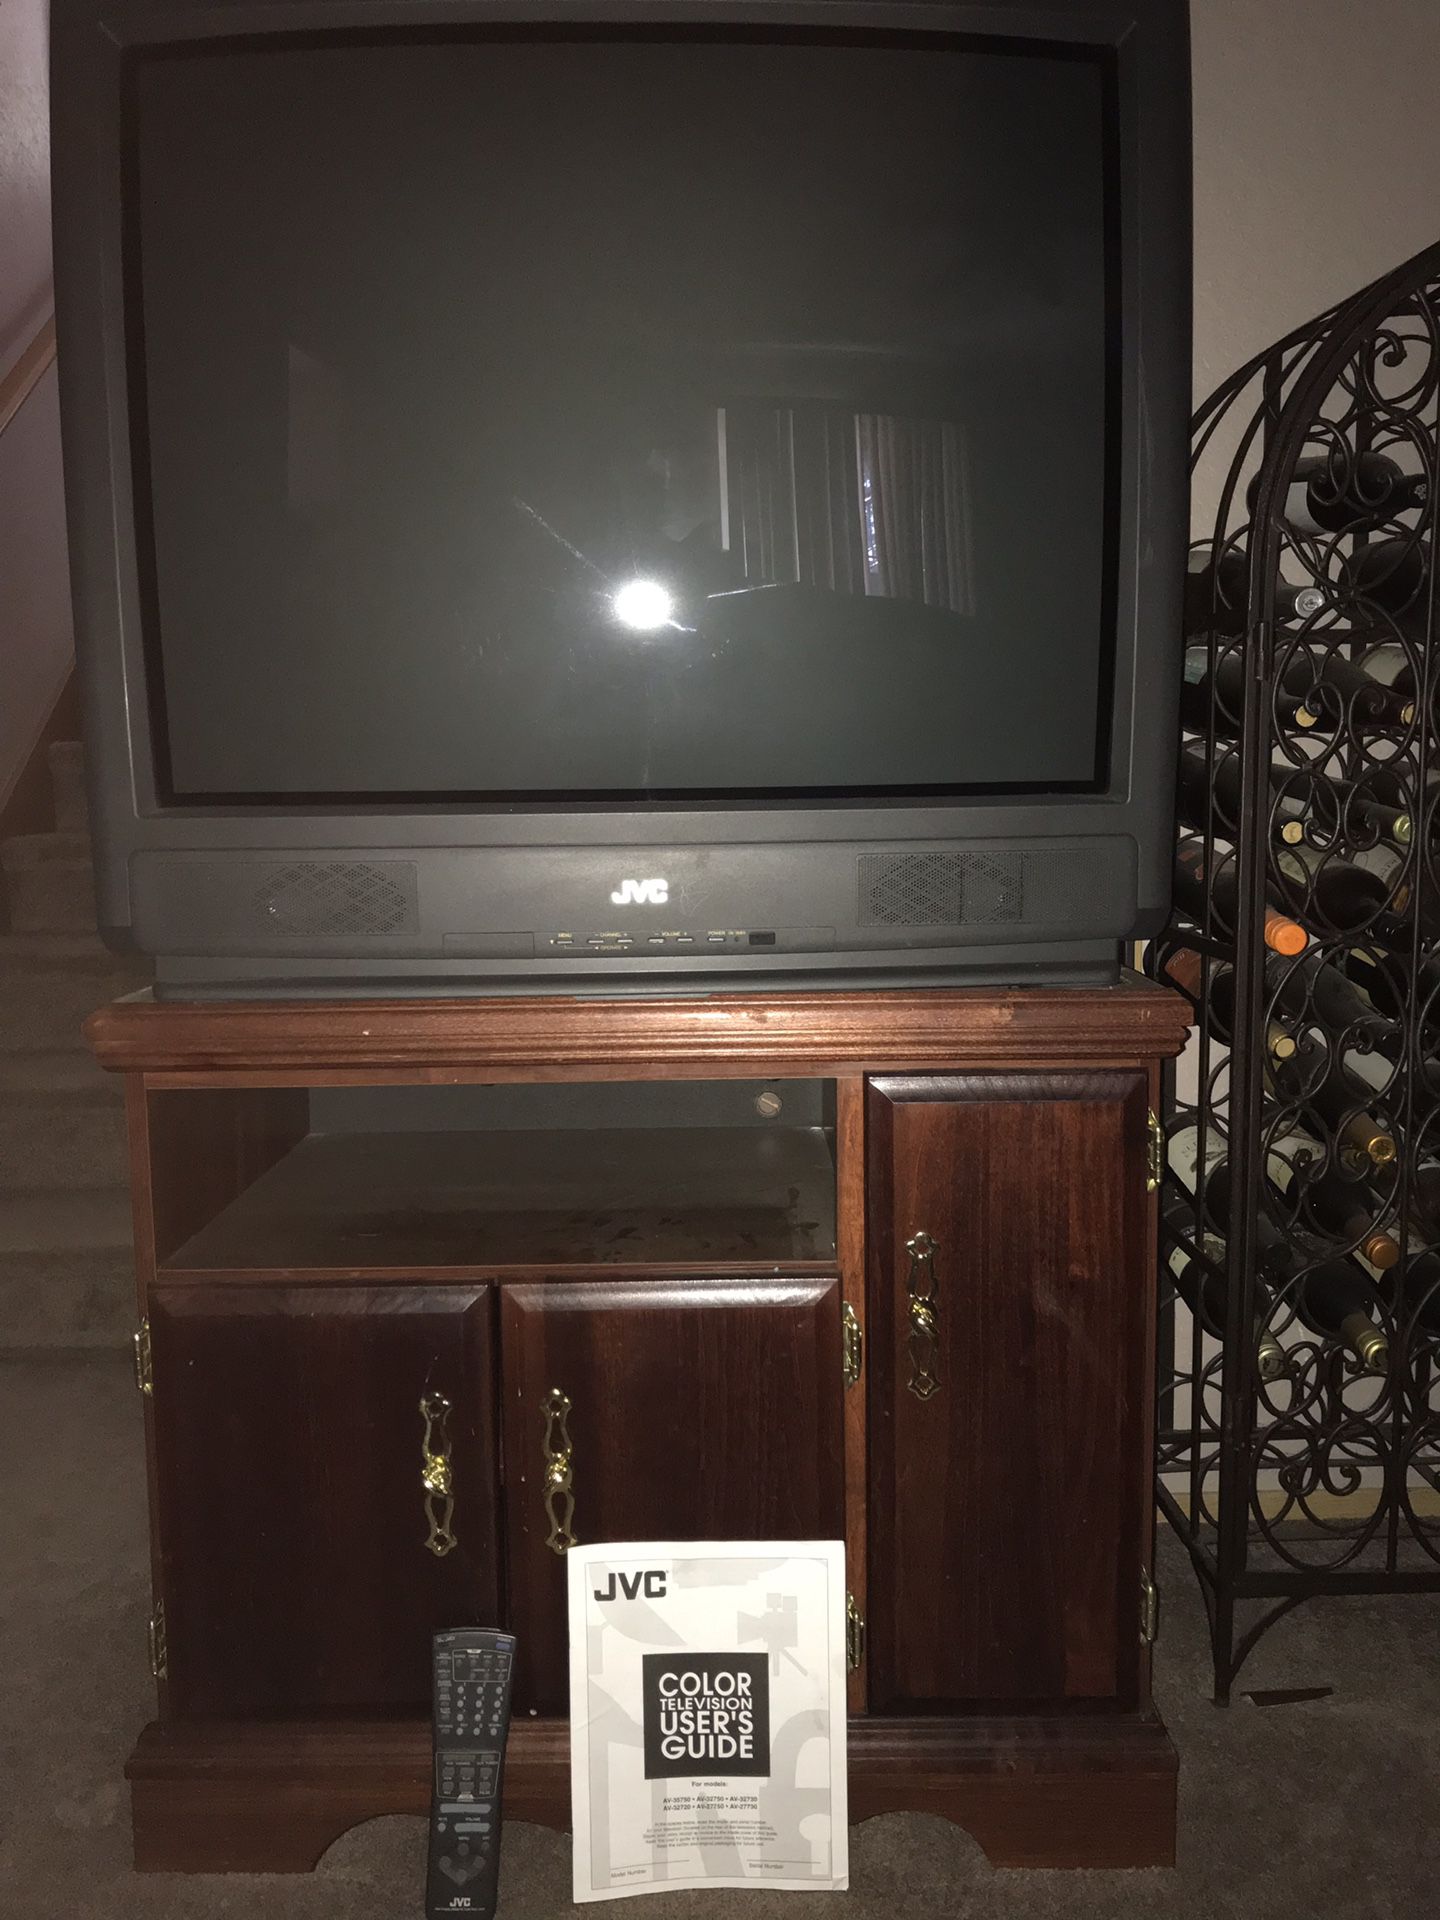 Vintage JVC 36” tube TV with remote & manual